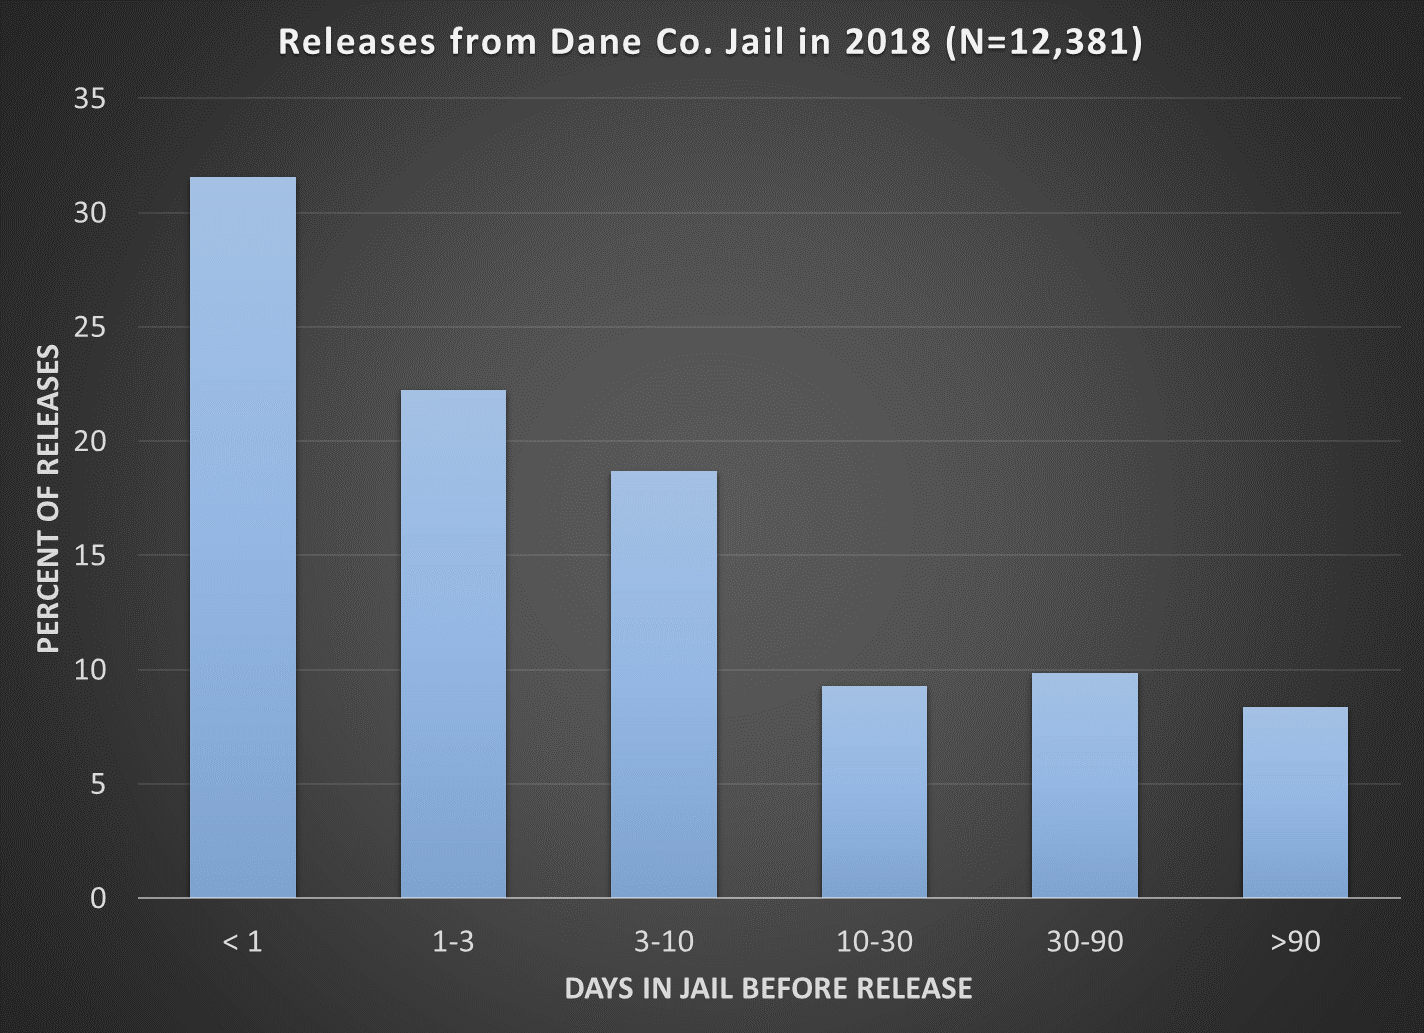 Bar graph length of stay for those released from Dane Co. Jail in 2018